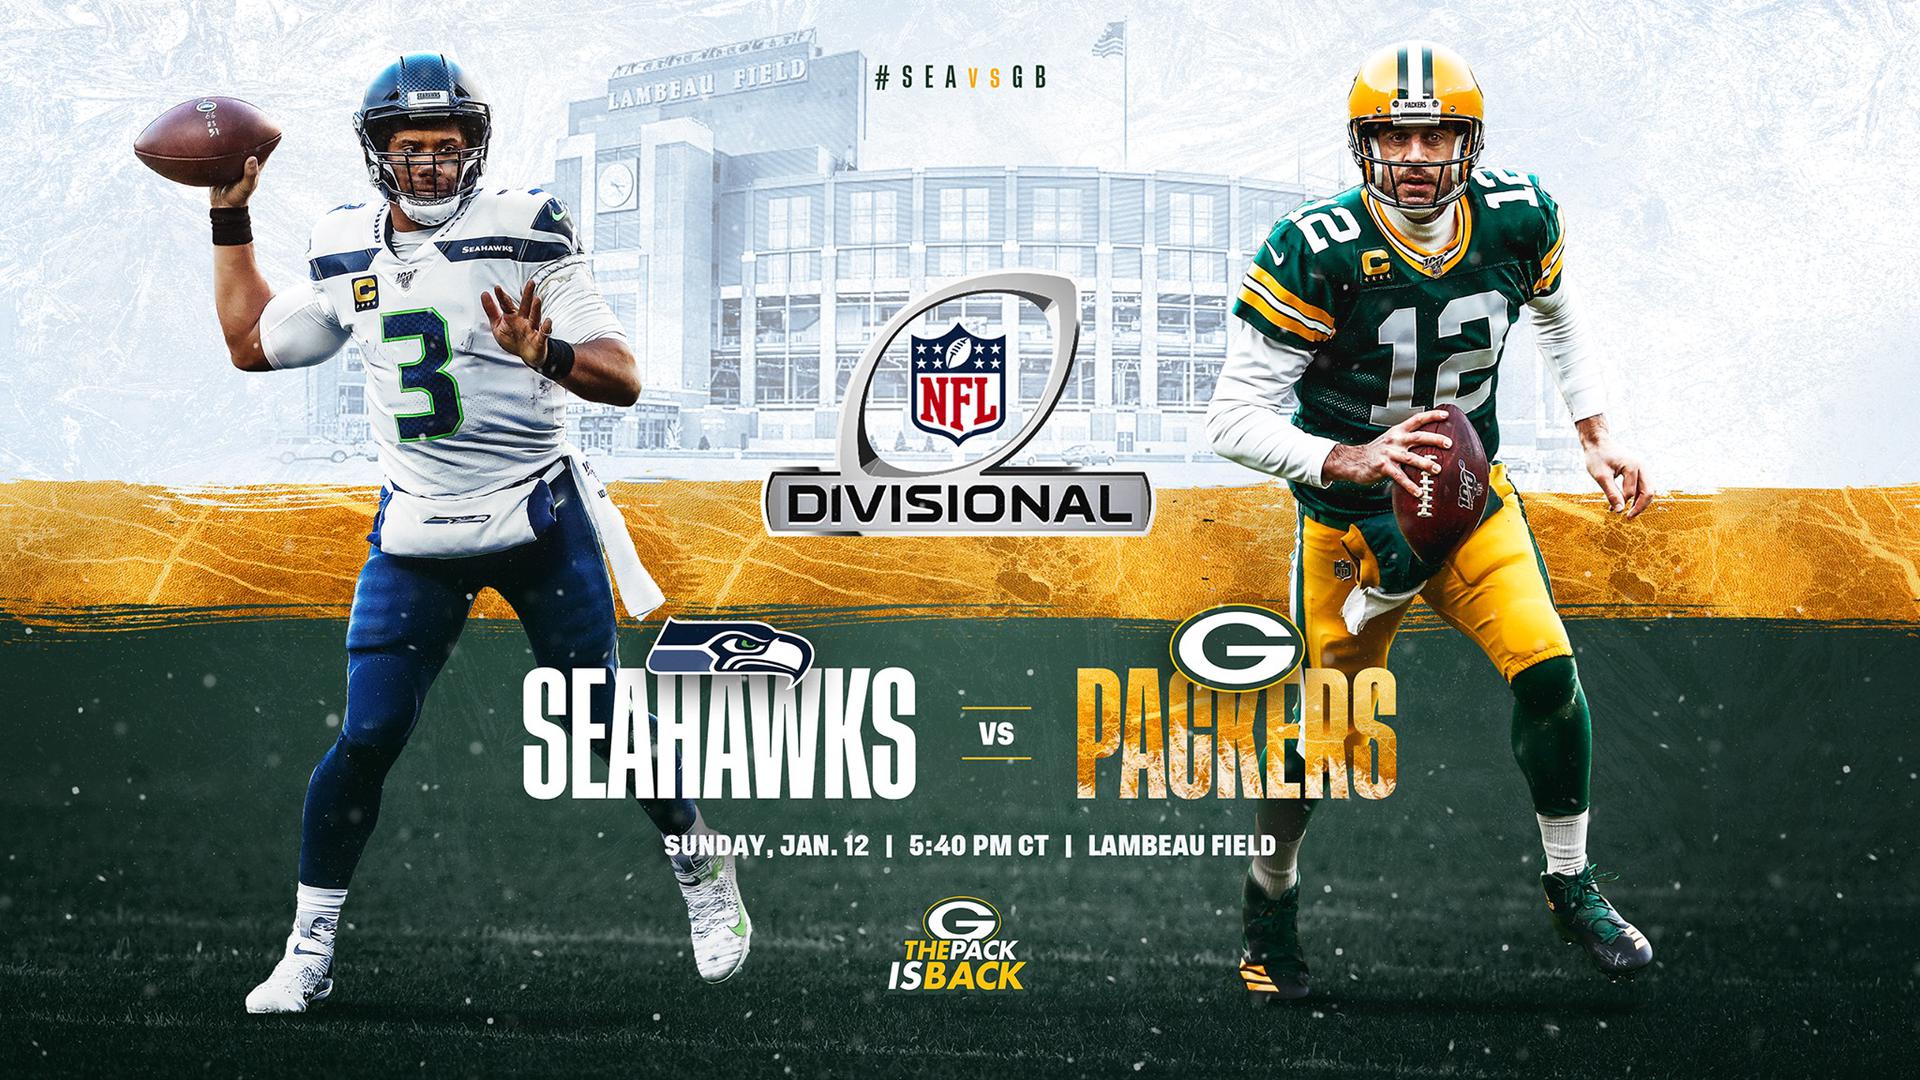 Packers vs. Seahawks Division Playoff Game is this Sunday!